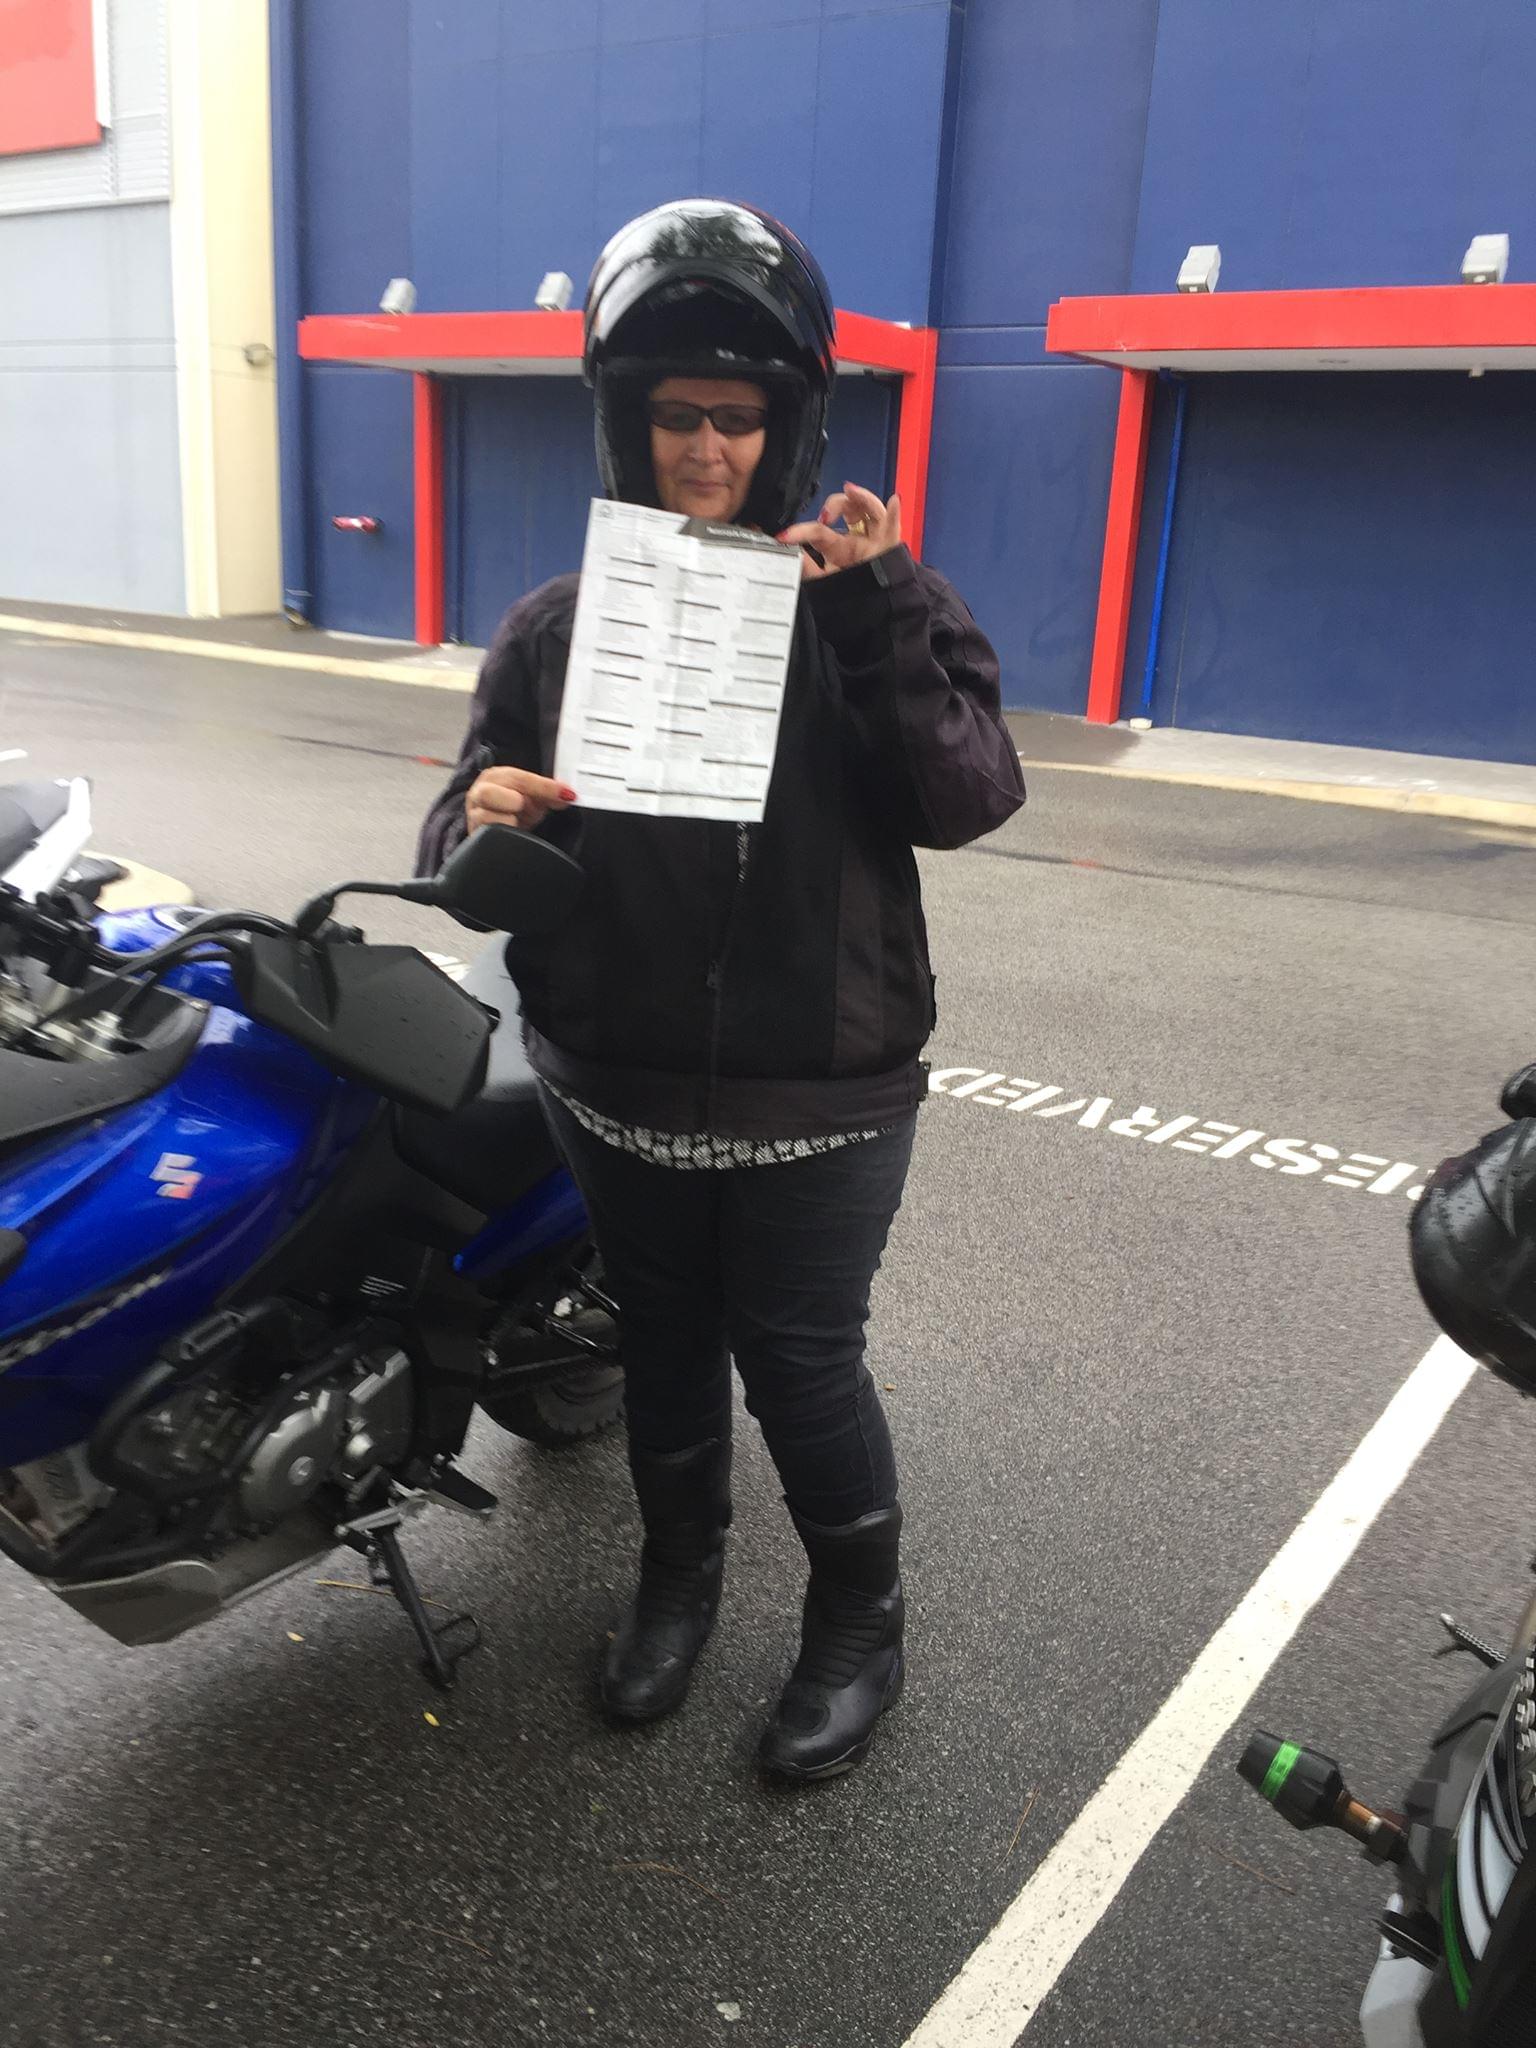 Congratulations on your pass